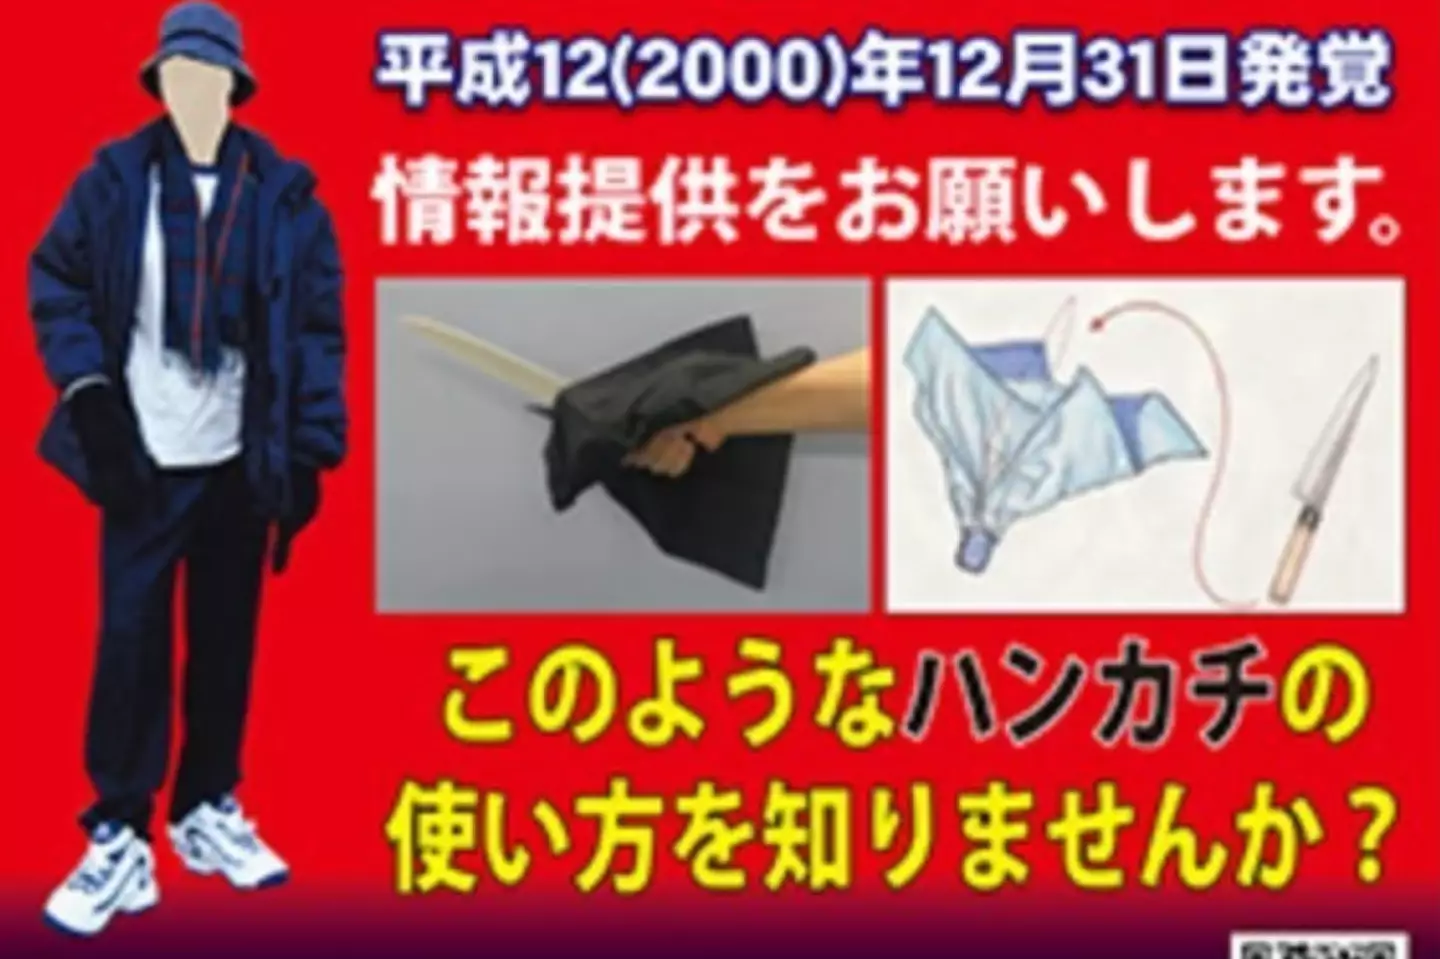 A wanted poster created by Tokyo Police.